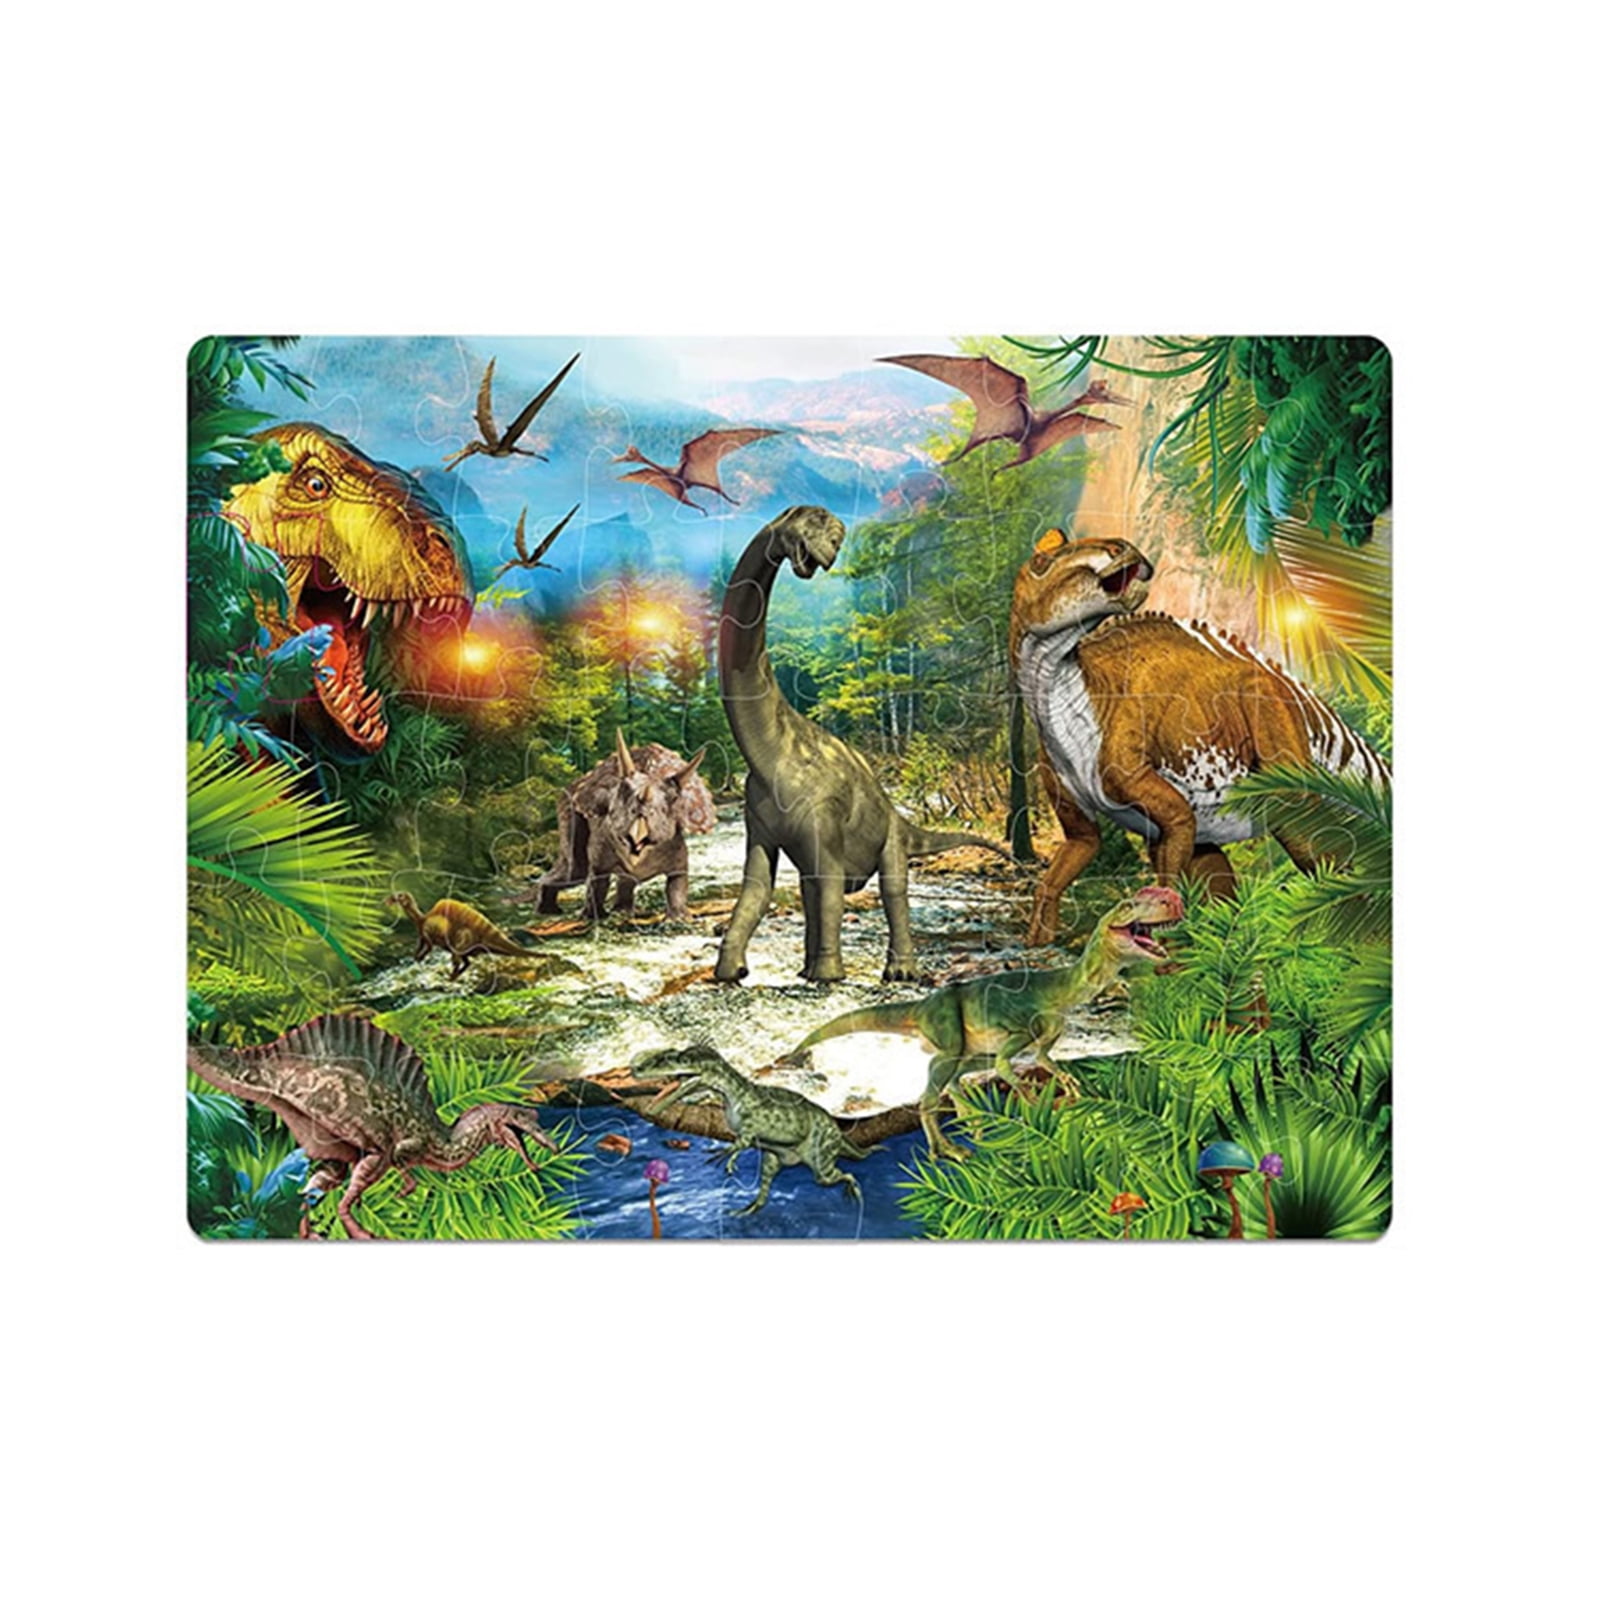 Dinosaur Tuck N' Tie Fleece Blanket Kit - DIY Crafts for Kids Ages 6+ Year  Old - Best Arts & Craft Girl Gifts Ideas - No Sew Quilt Blanket Making Kits